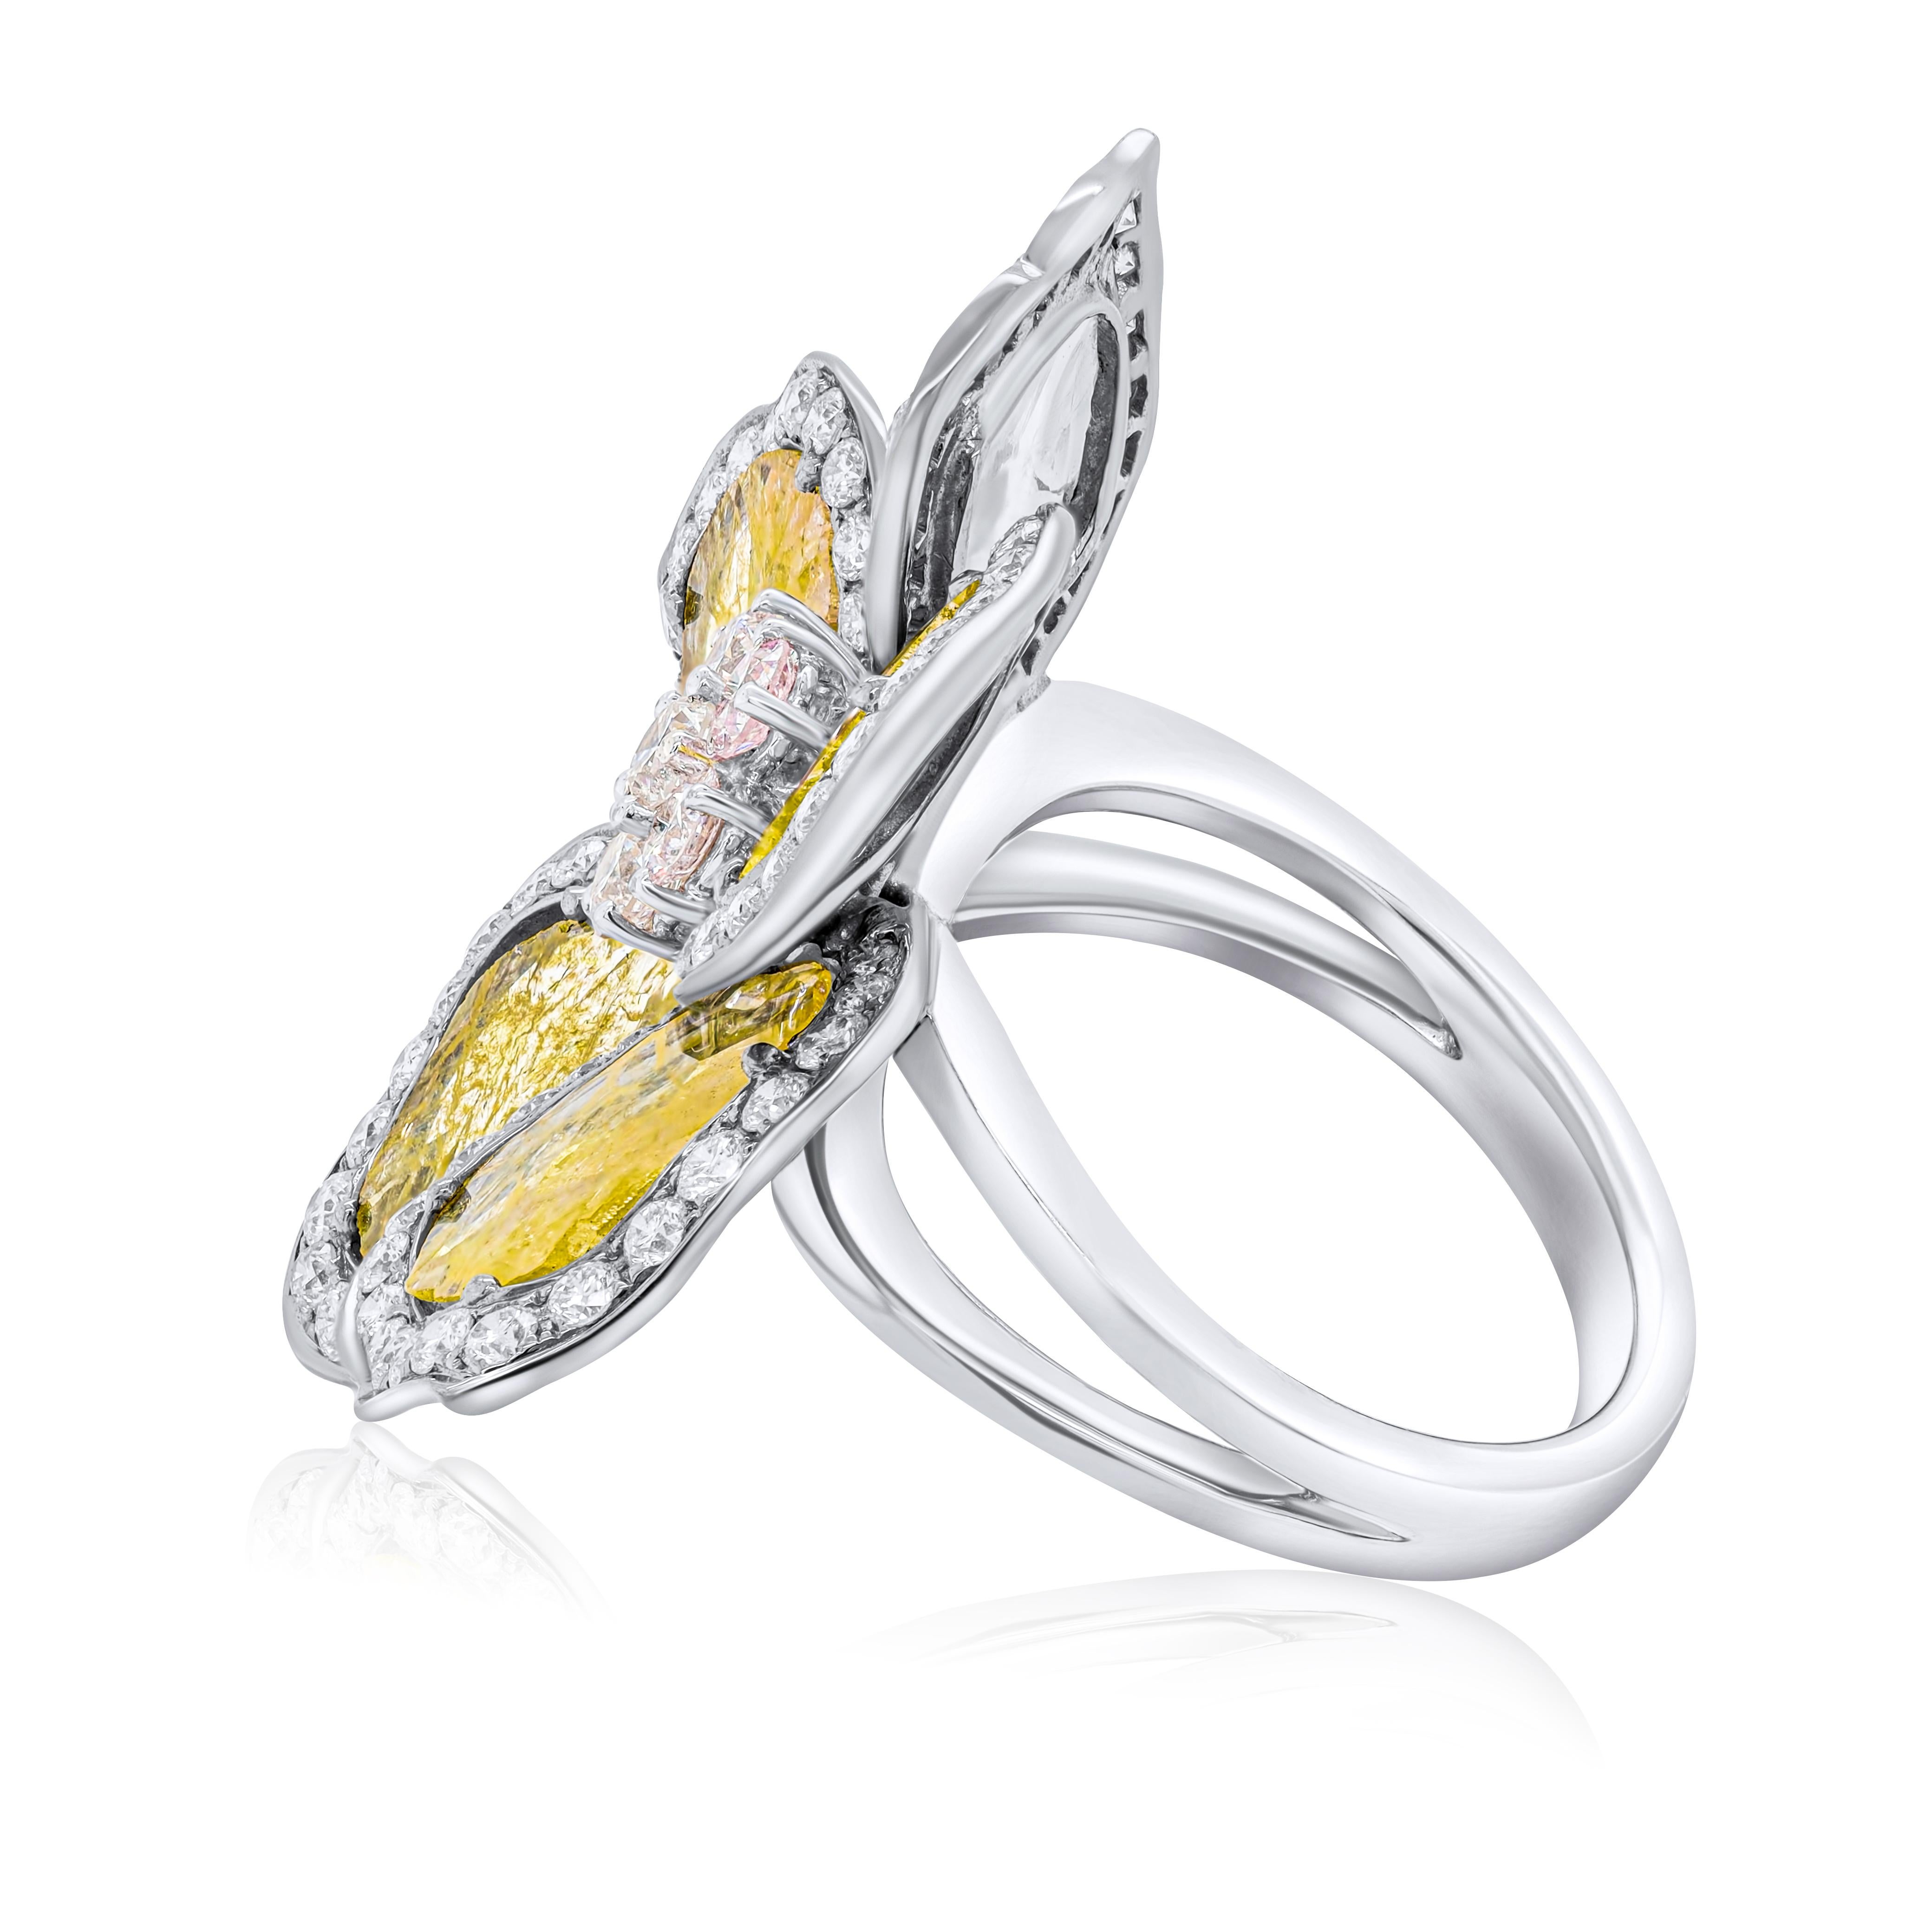 Modern Diana M .18kt wg diamond ring  flower design with 6.53cts yellow sliced diamonds For Sale